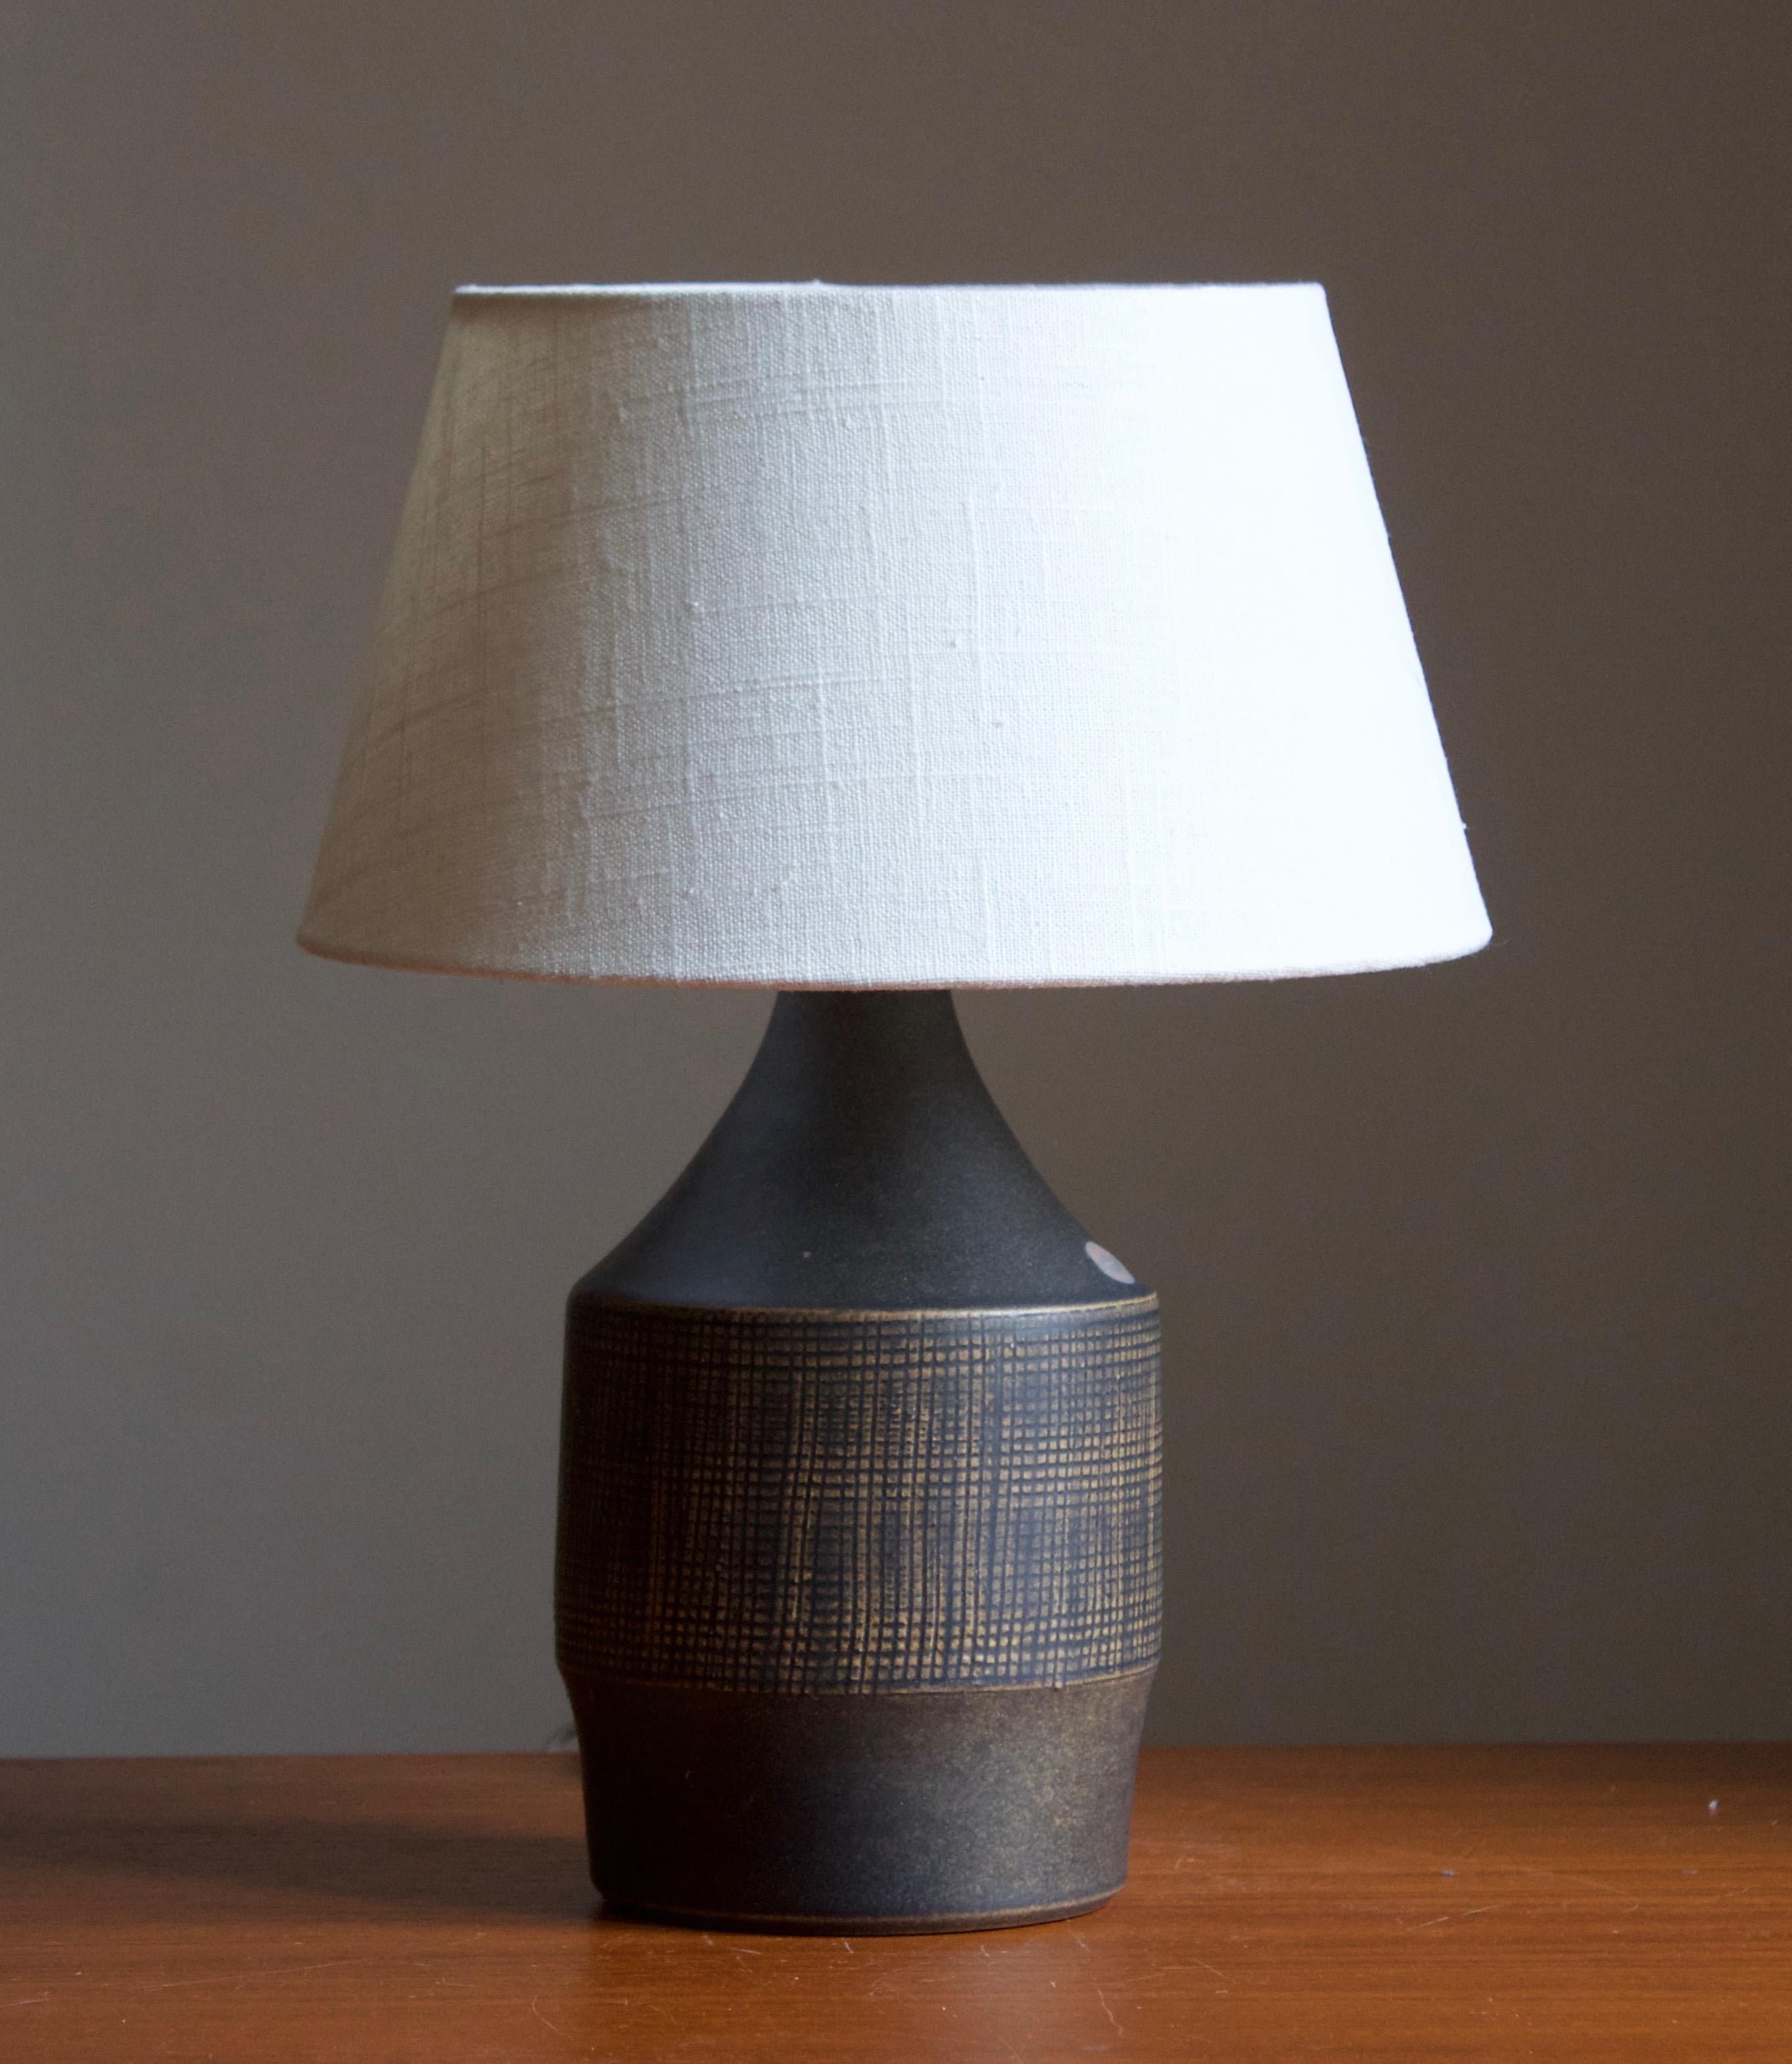 A stoneware table lamp designed by Henry Brandi, and produced by his own firm, Brandi Vejbystrand, Sweden, 1960s. Marked and labeled. 

Stated dimensions exclude lamsphade. Height includes socket. Lampshade is not included in purchase.

Other